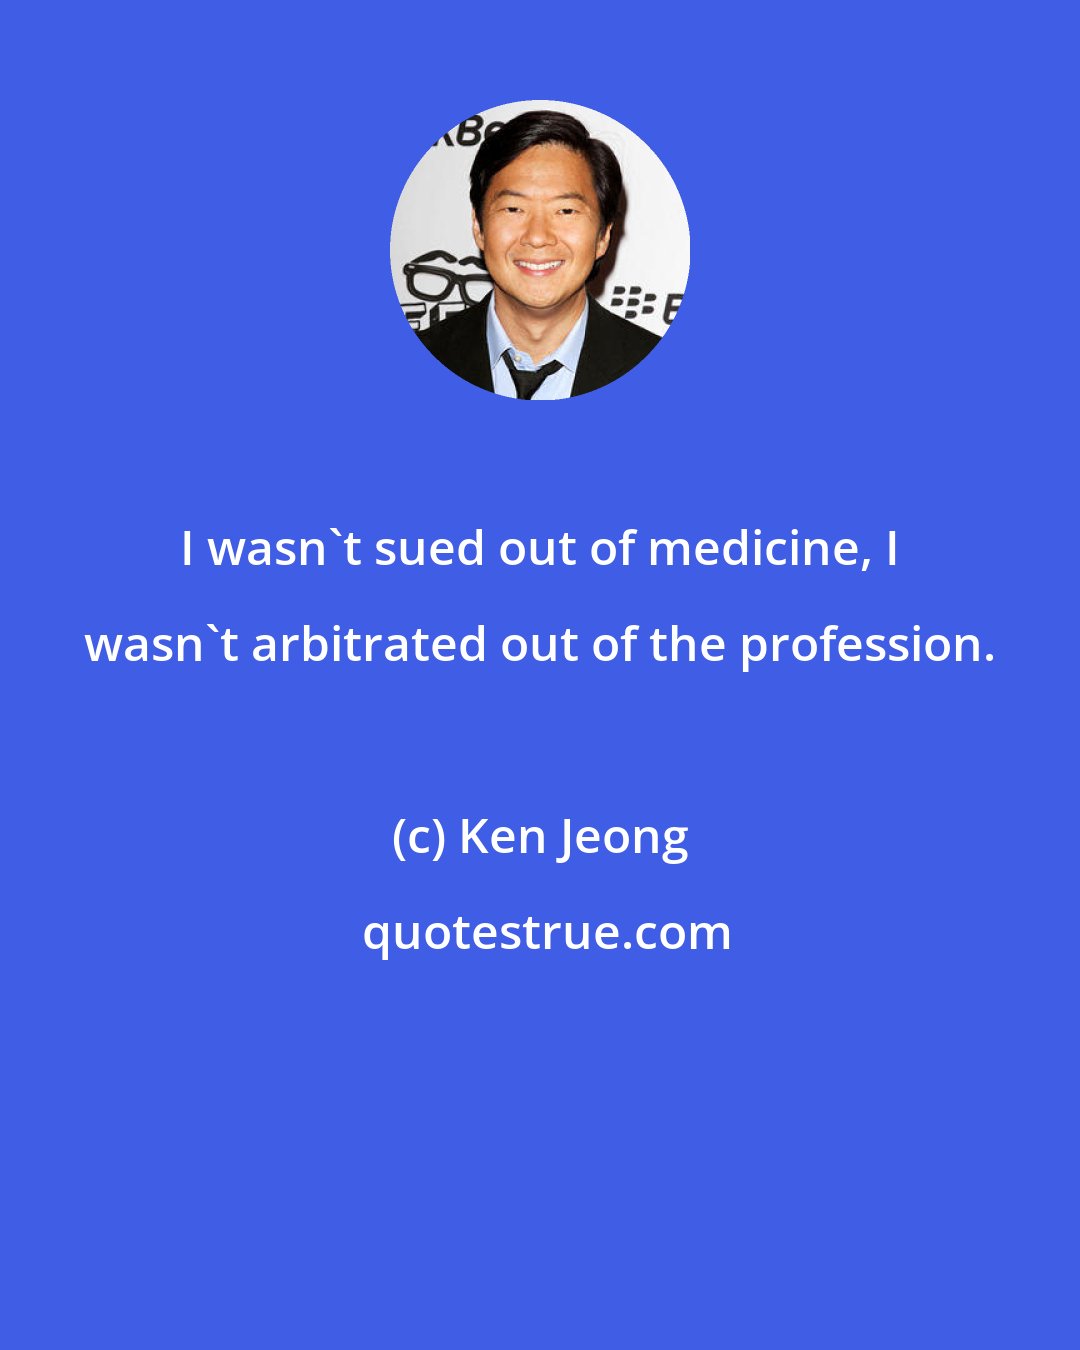 Ken Jeong: I wasn't sued out of medicine, I wasn't arbitrated out of the profession.